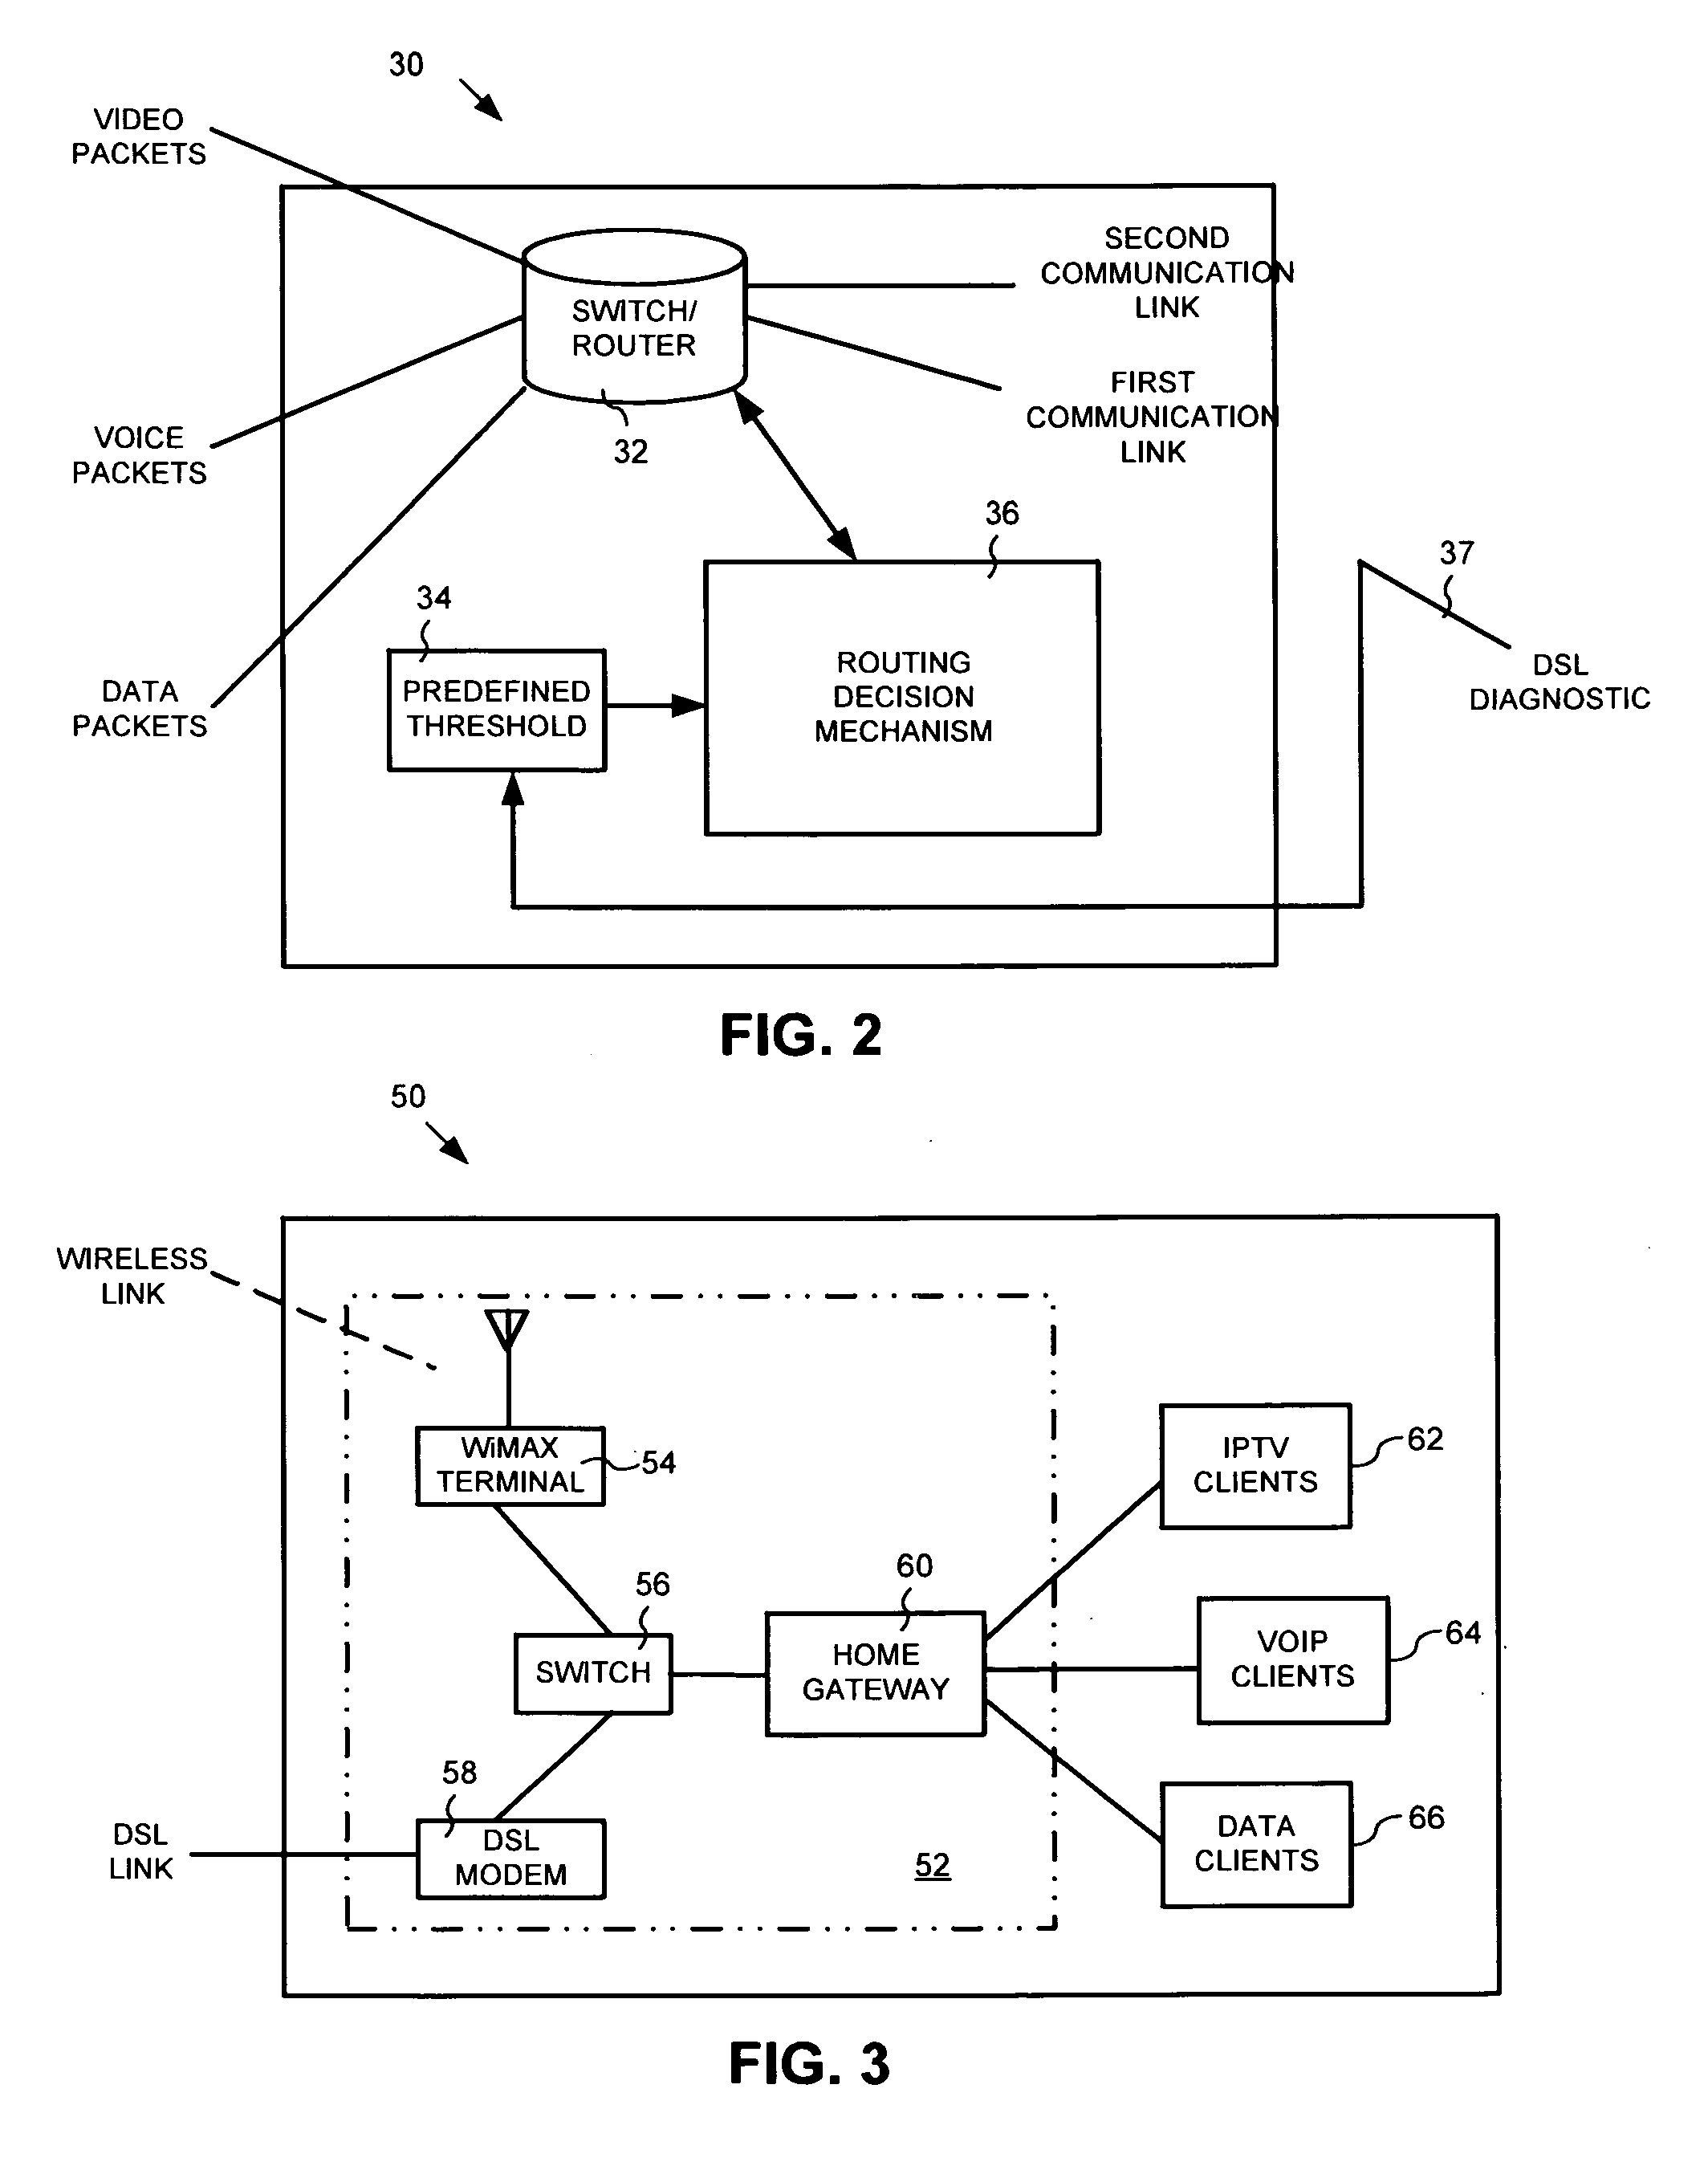 System and method for delivering packet data over a multiplicity of communication links